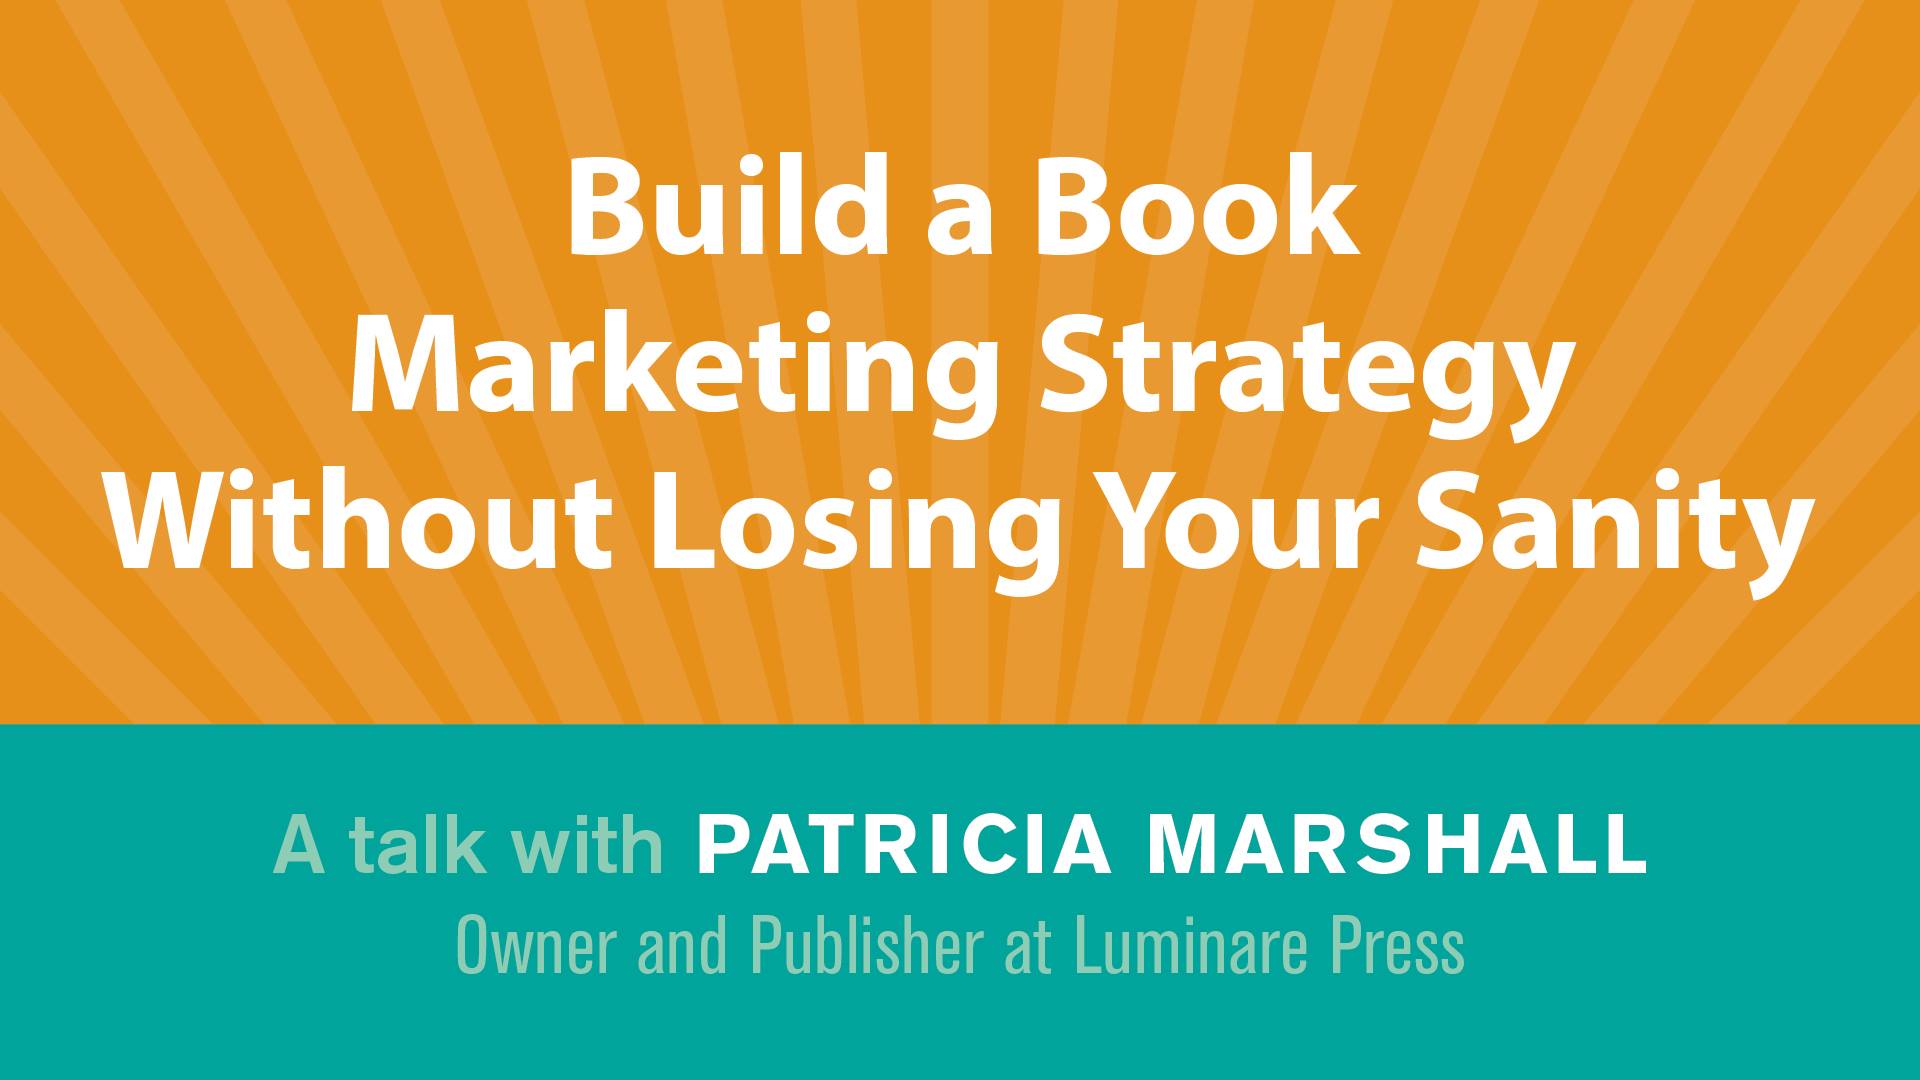 book marketing strategy guide video